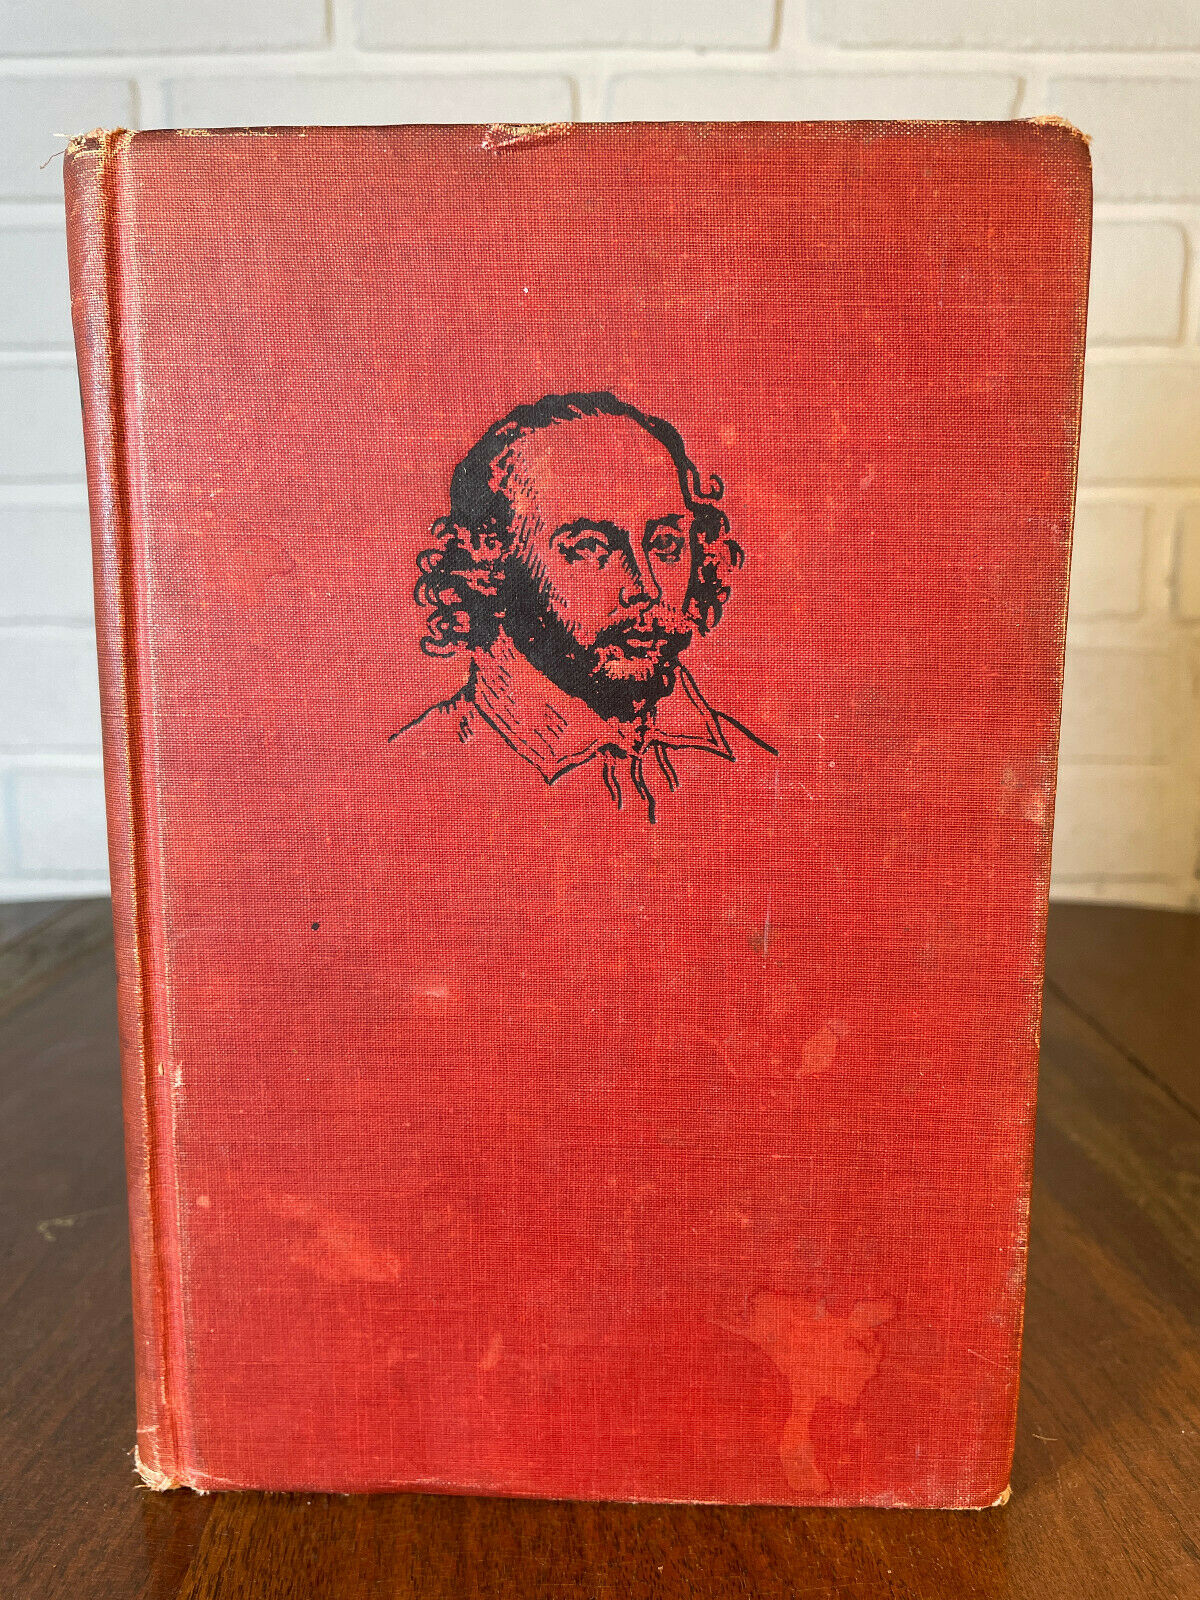 The Complete Works of William Shakespeare with The Temple Notes & tabbed (C10)